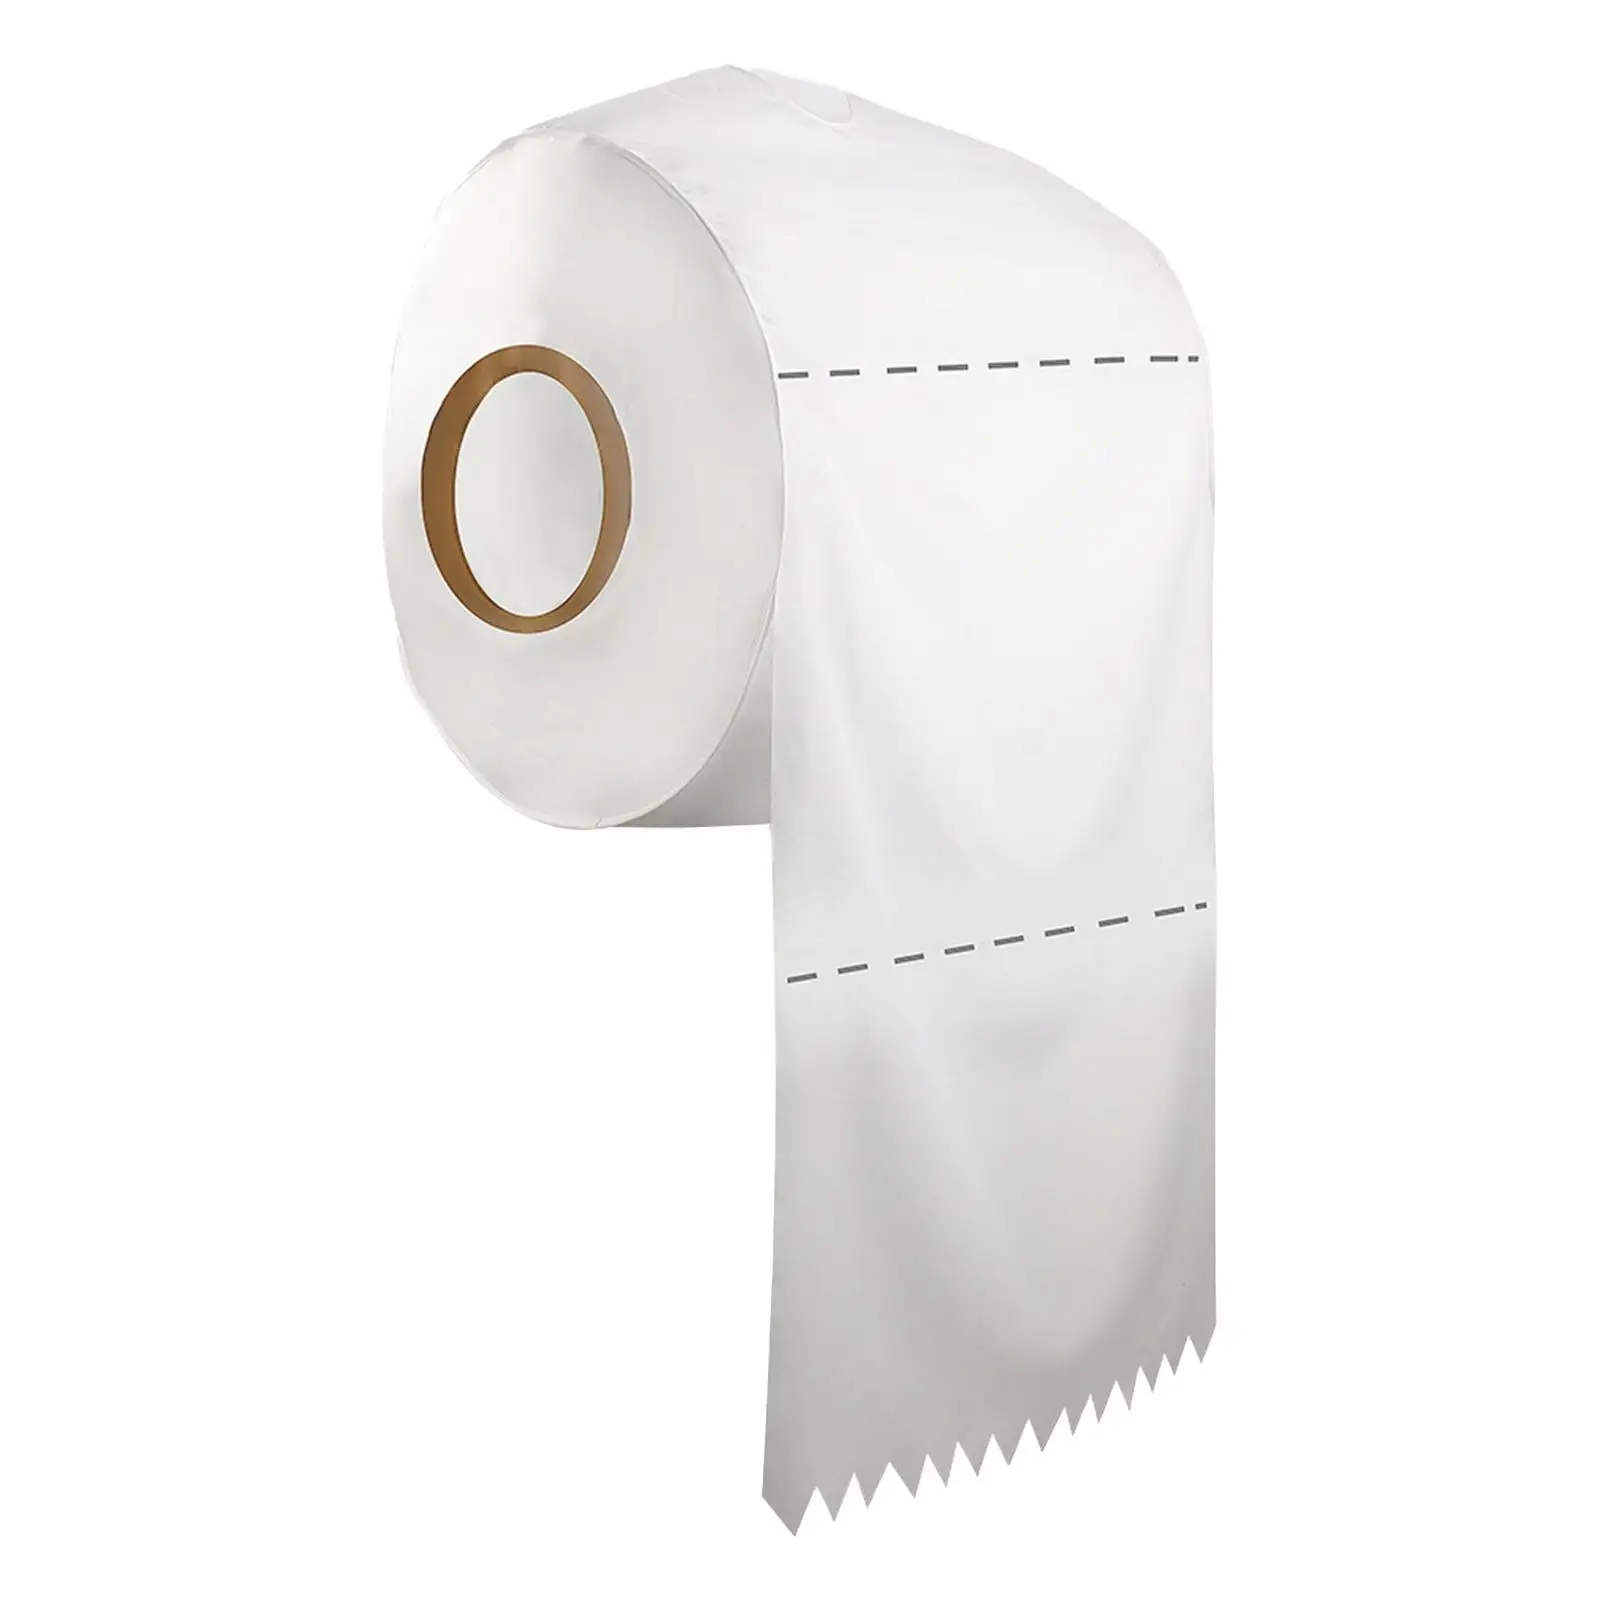 Toilet Tissue Costume Funny Cosplay Costume Giant Toilet Paper Roll Halloween Costume for Party Cosplay Halloween Couples Adults